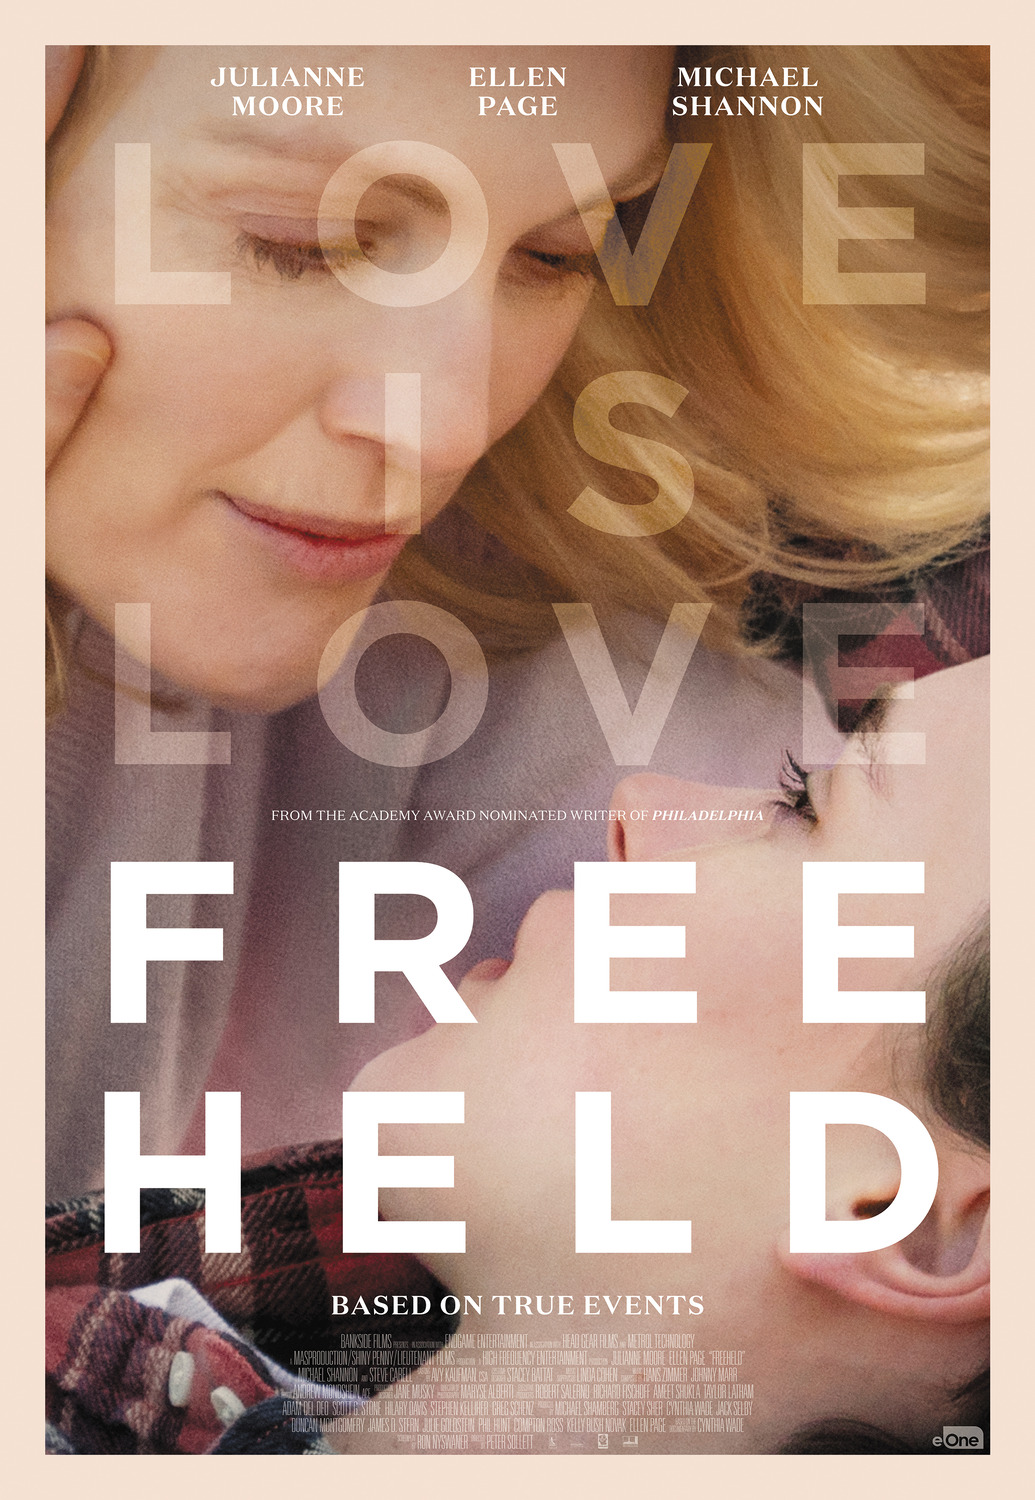 Extra Large Movie Poster Image for Freeheld (#7 of 12)